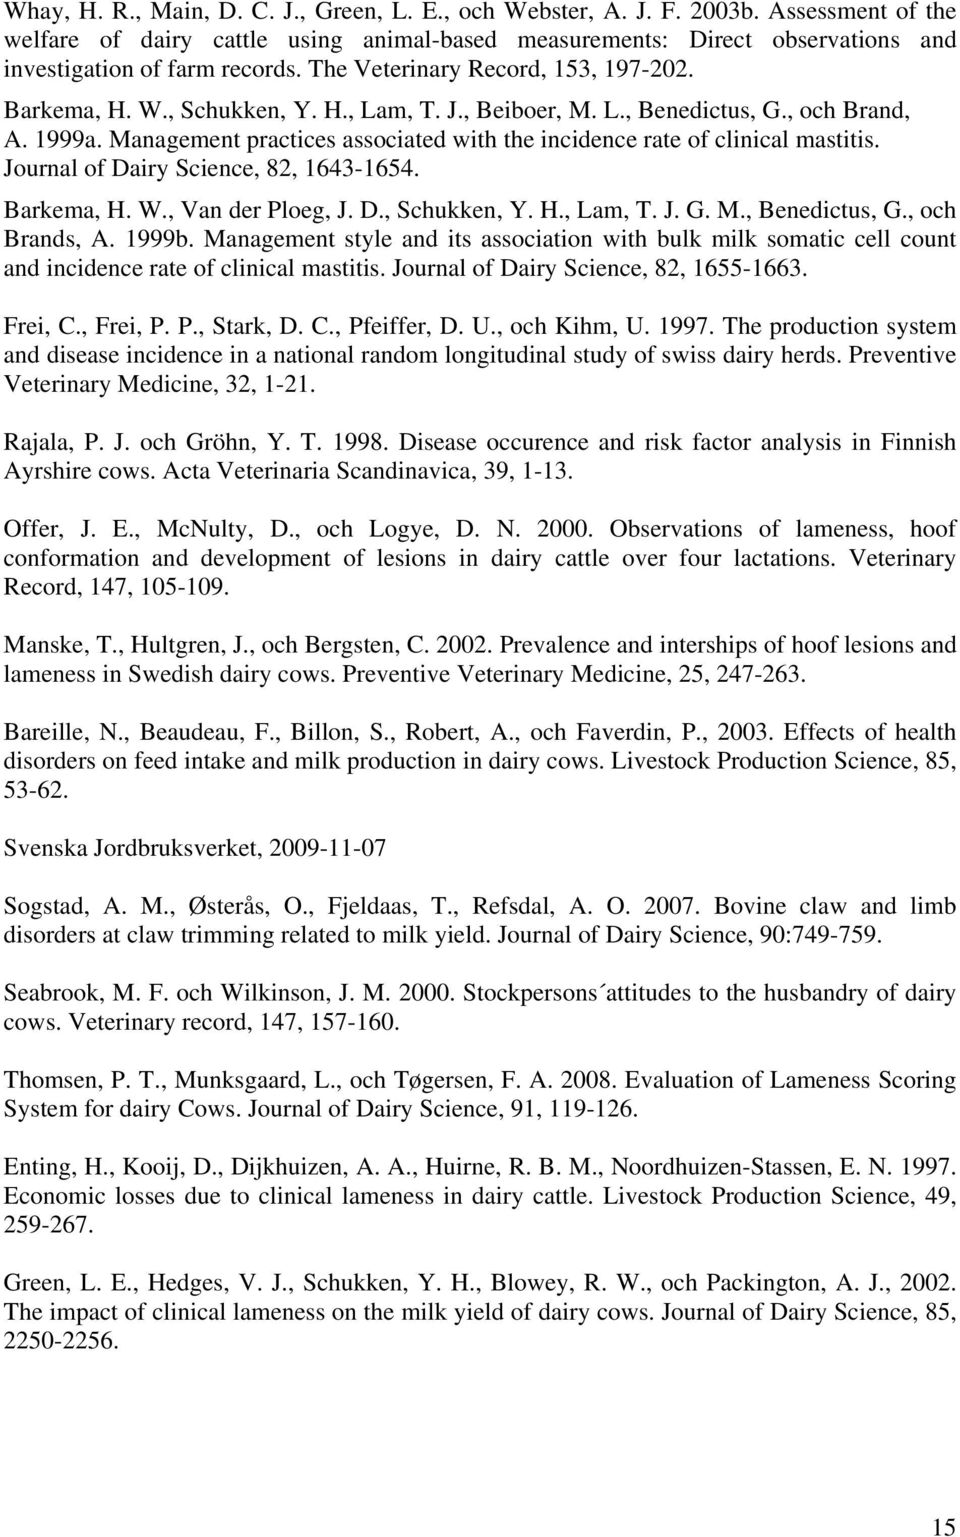 J., Beiboer, M. L., Benedictus, G., och Brand, A. 1999a. Management practices associated with the incidence rate of clinical mastitis. Journal of Dairy Science, 82, 1643-1654. Barkema, H. W.